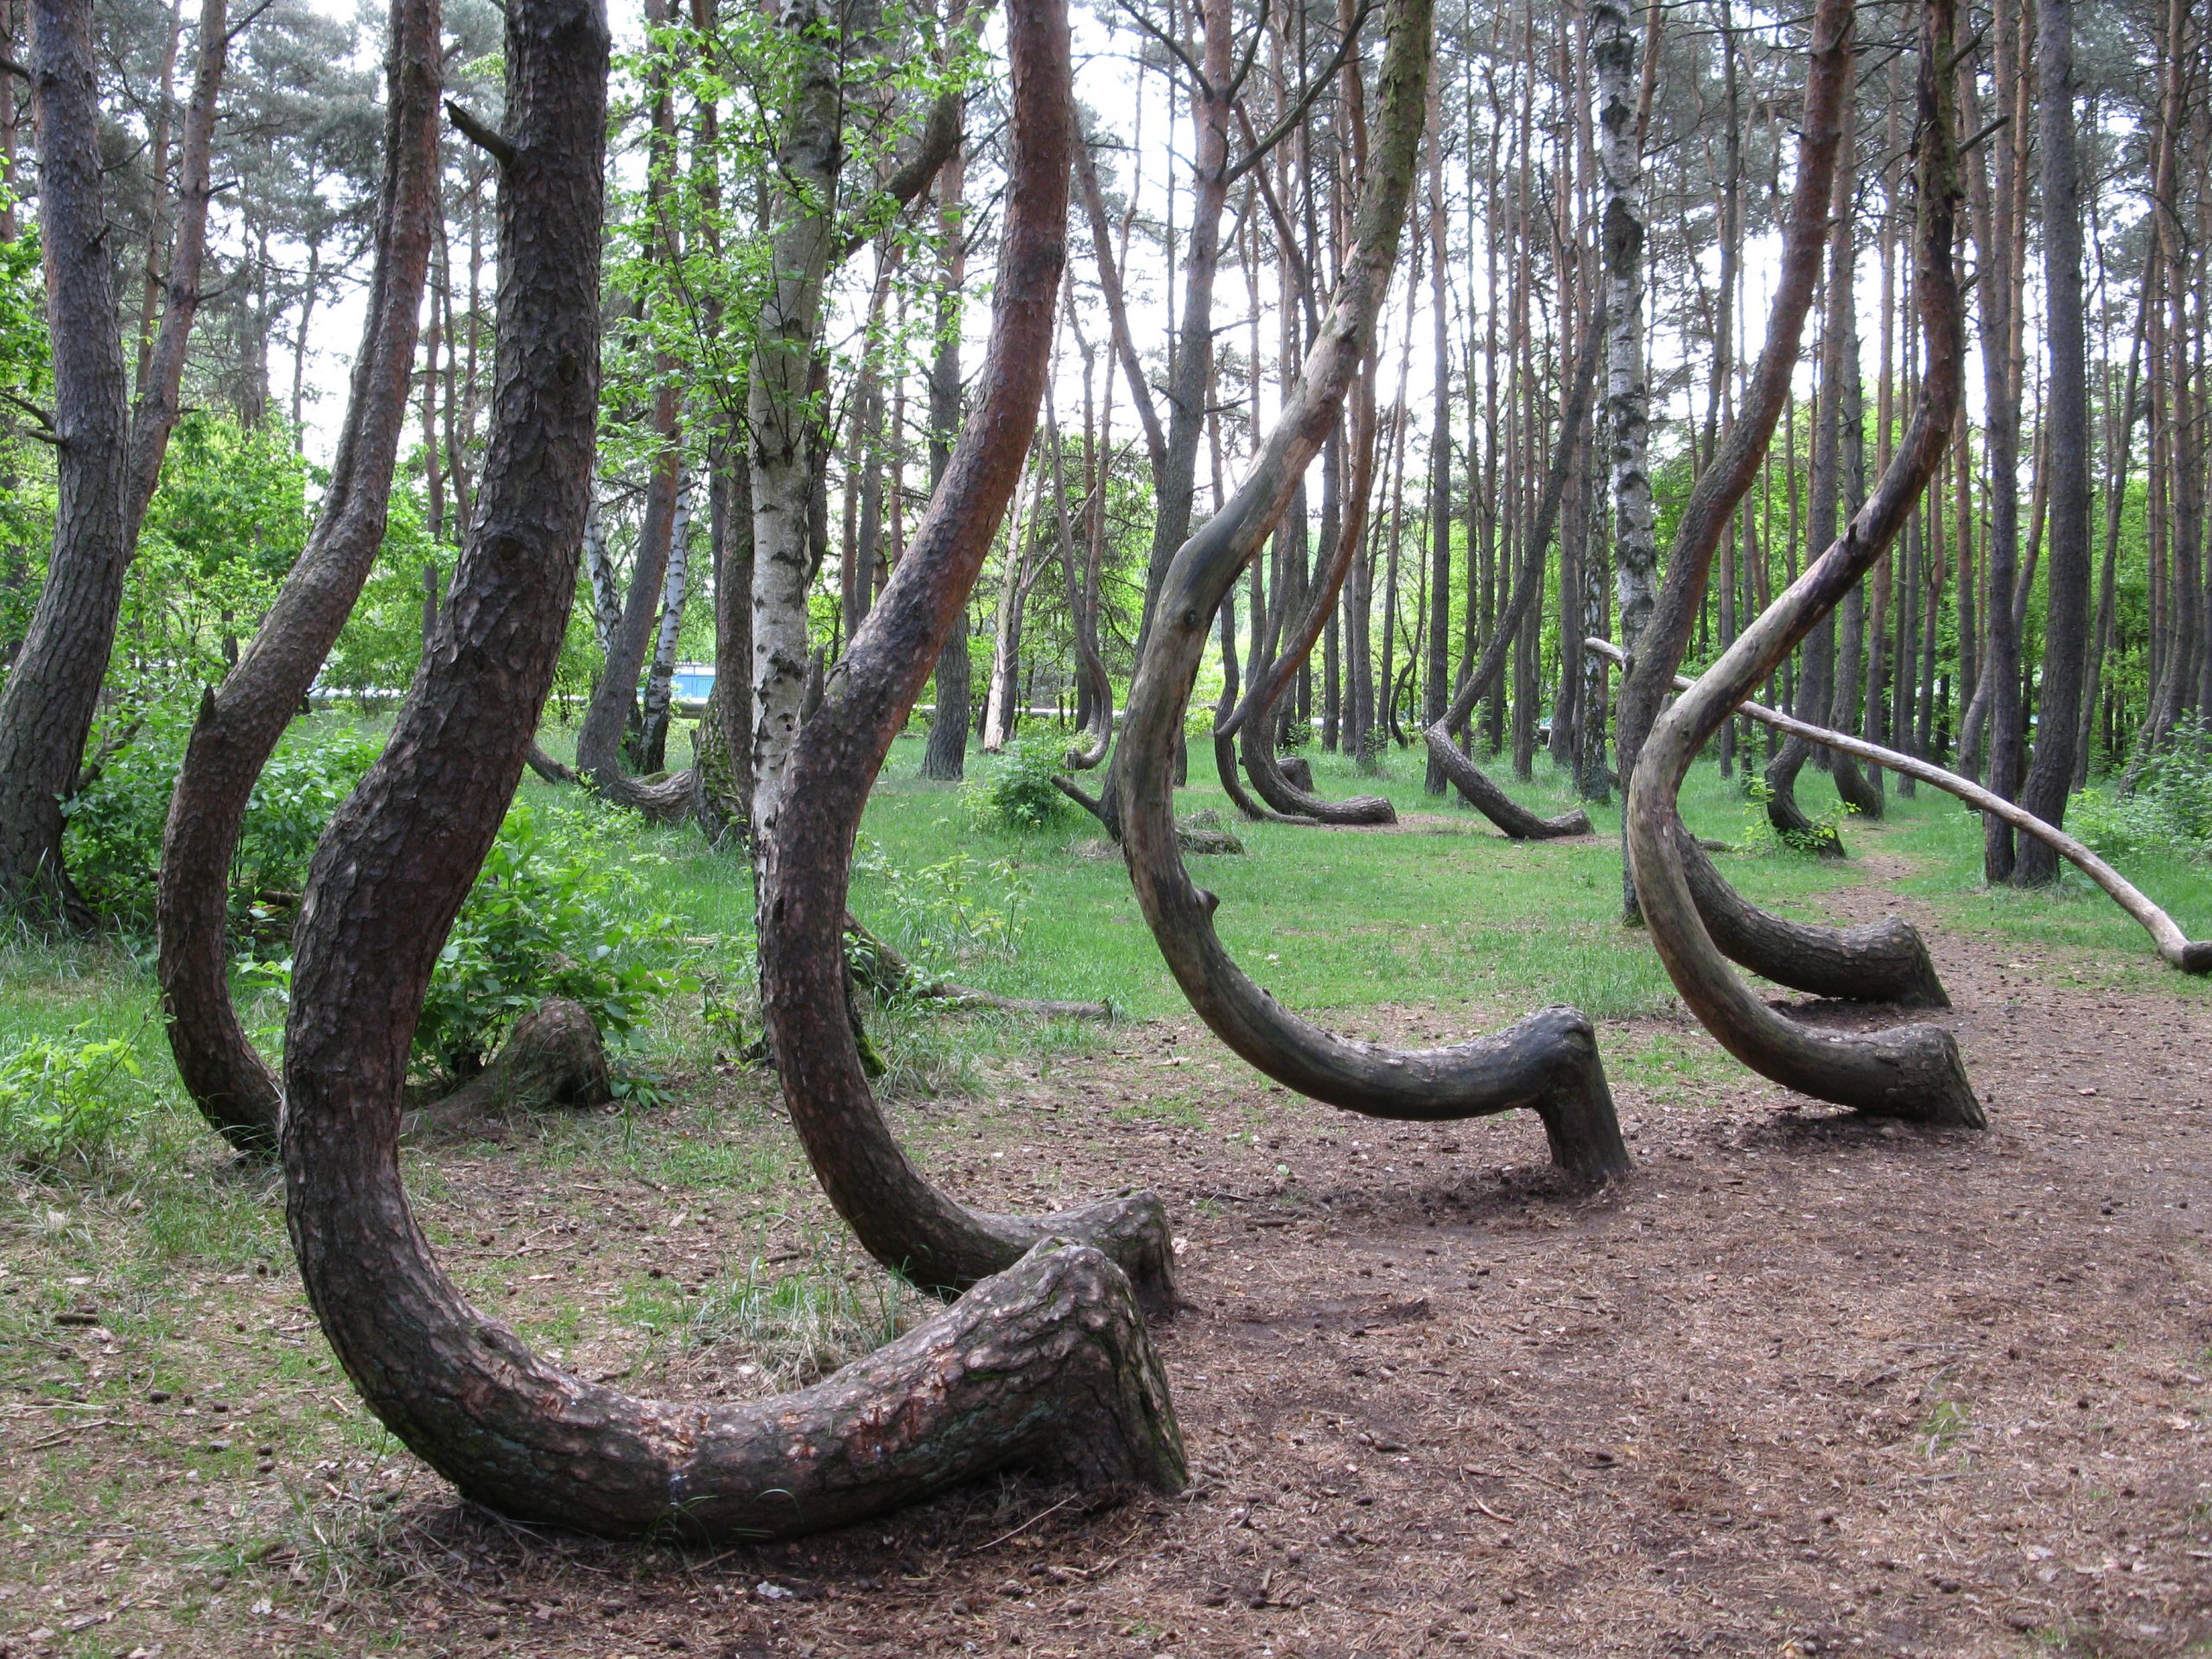 In the Crooked Forest all the trees grow sideways